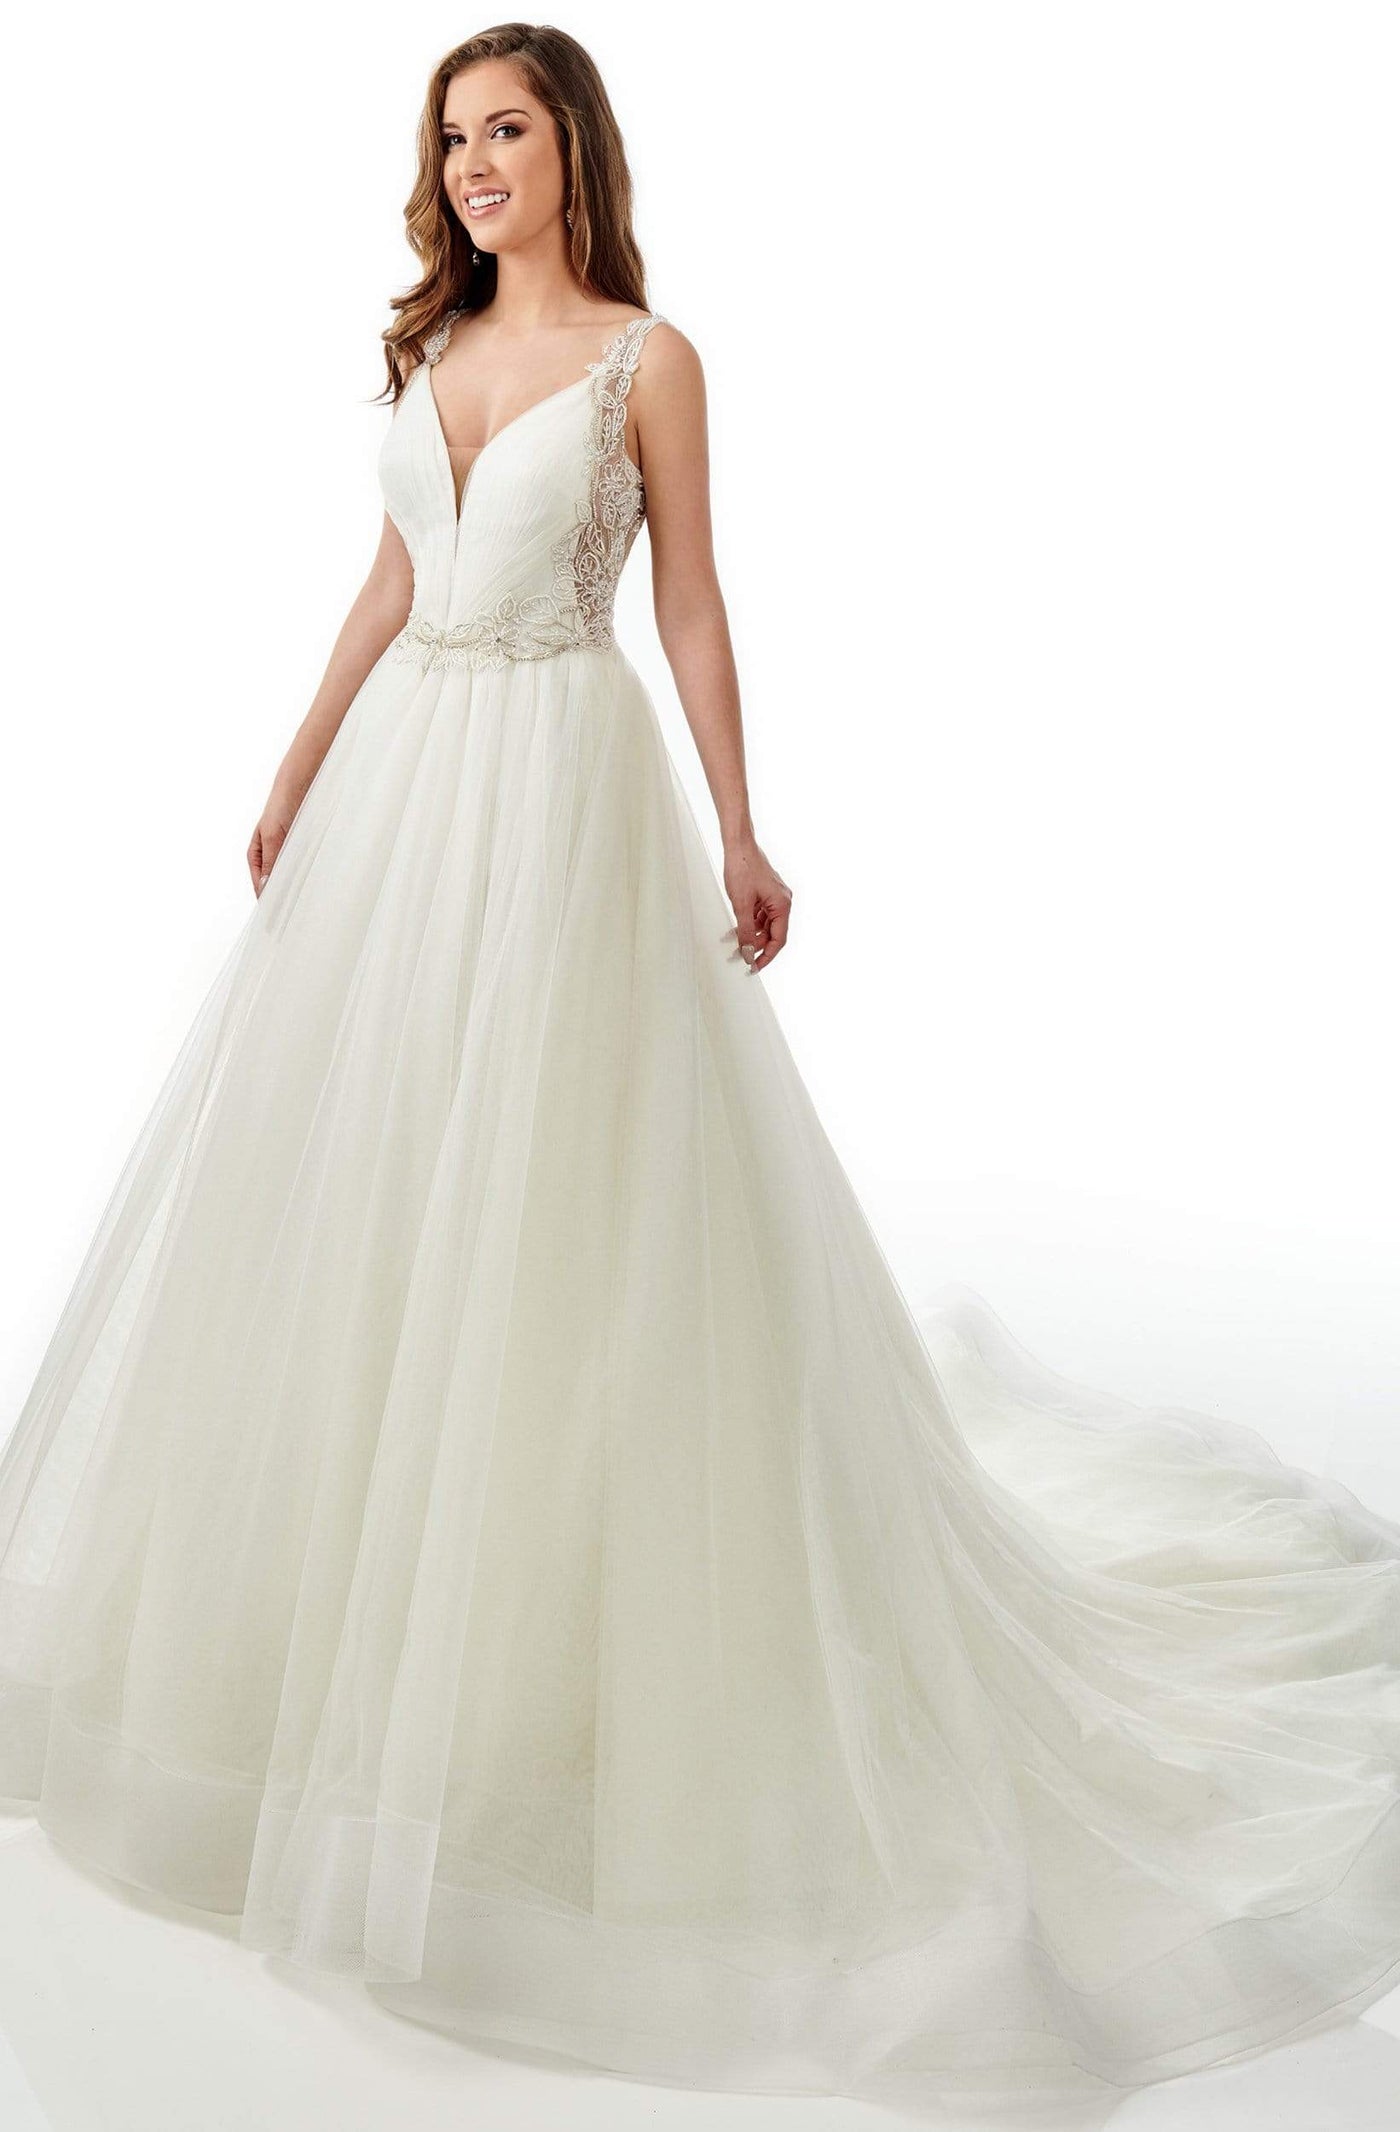 Lo'Adoro Bridal By Rachel Allan - M756 Plunging V-Neck Ruched Gown Wedding Dresses 0 / White Nude